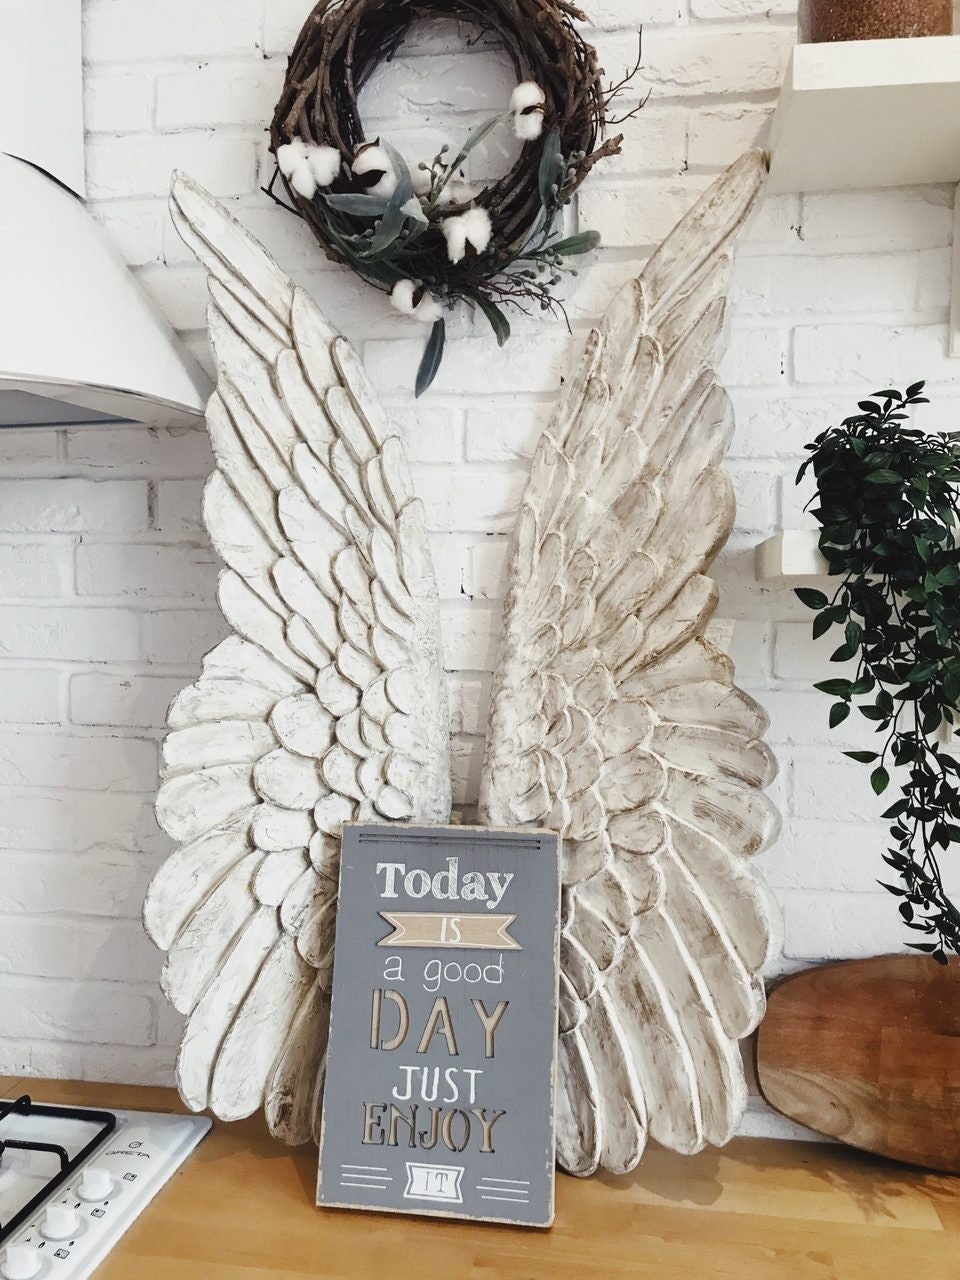 Bwlzsp Angel wings ceramic crafts creative home living room decoration –  Pete's Arts, Crafts and Sewing